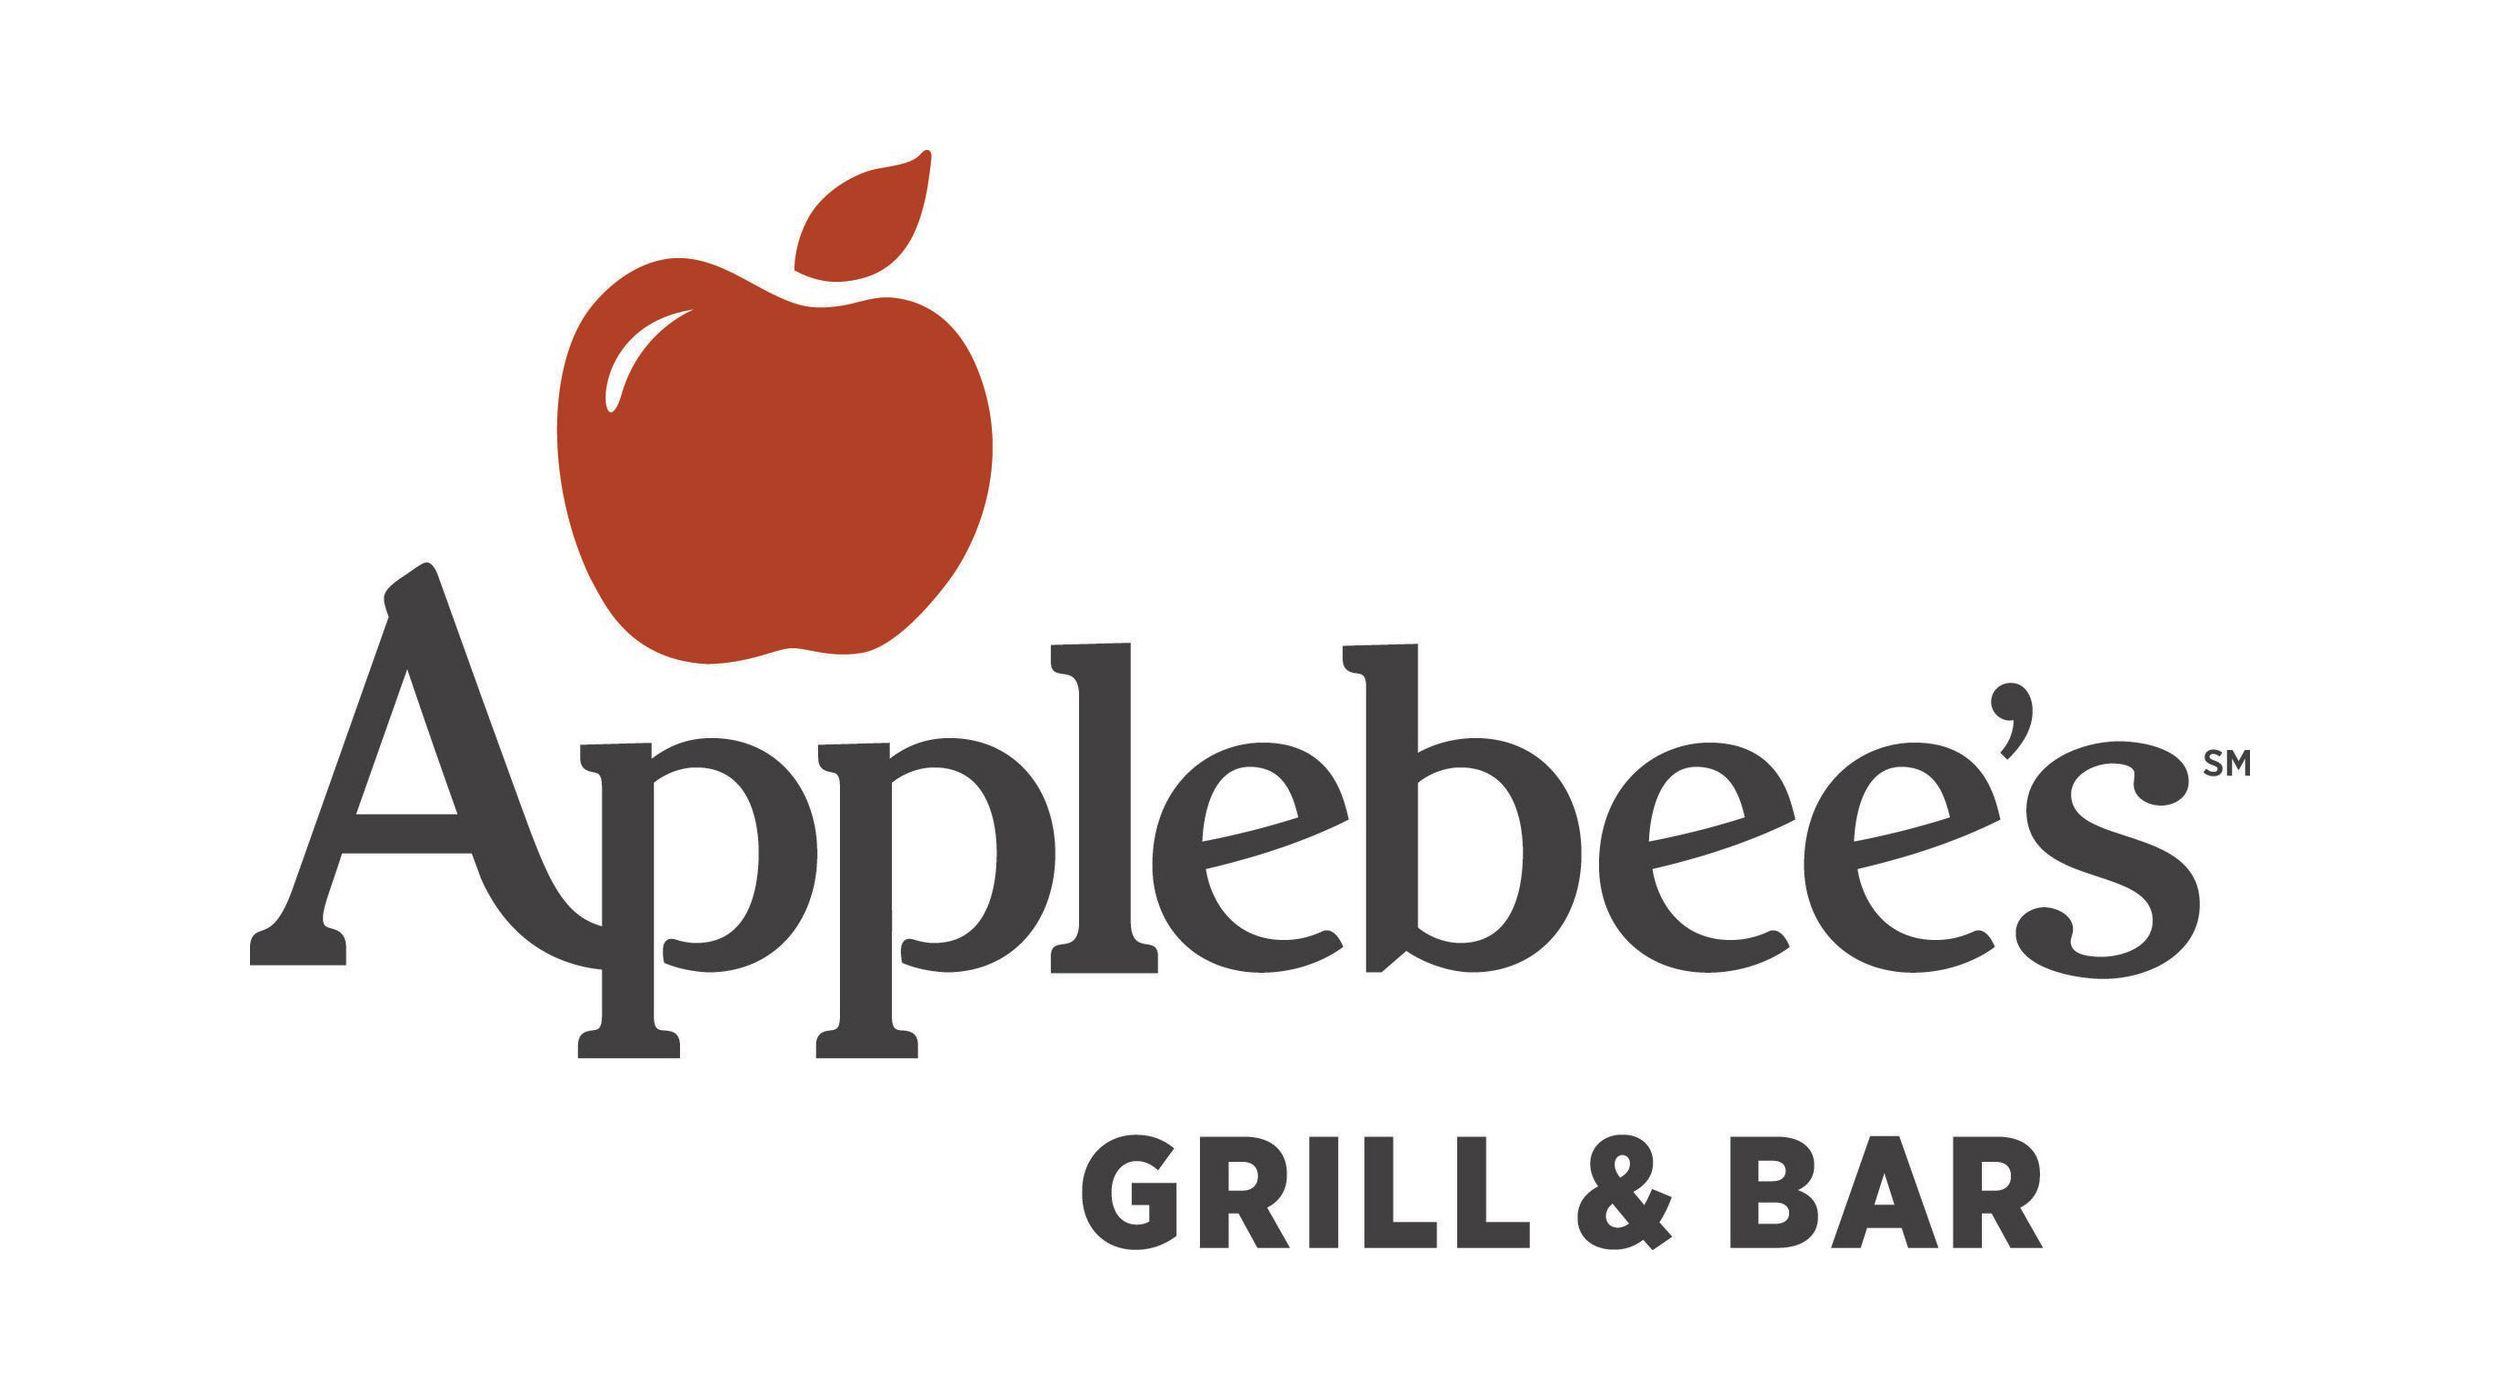 Applebees Logo - Applebees Logo, Applebees Symbol, Meaning, History and Evolution